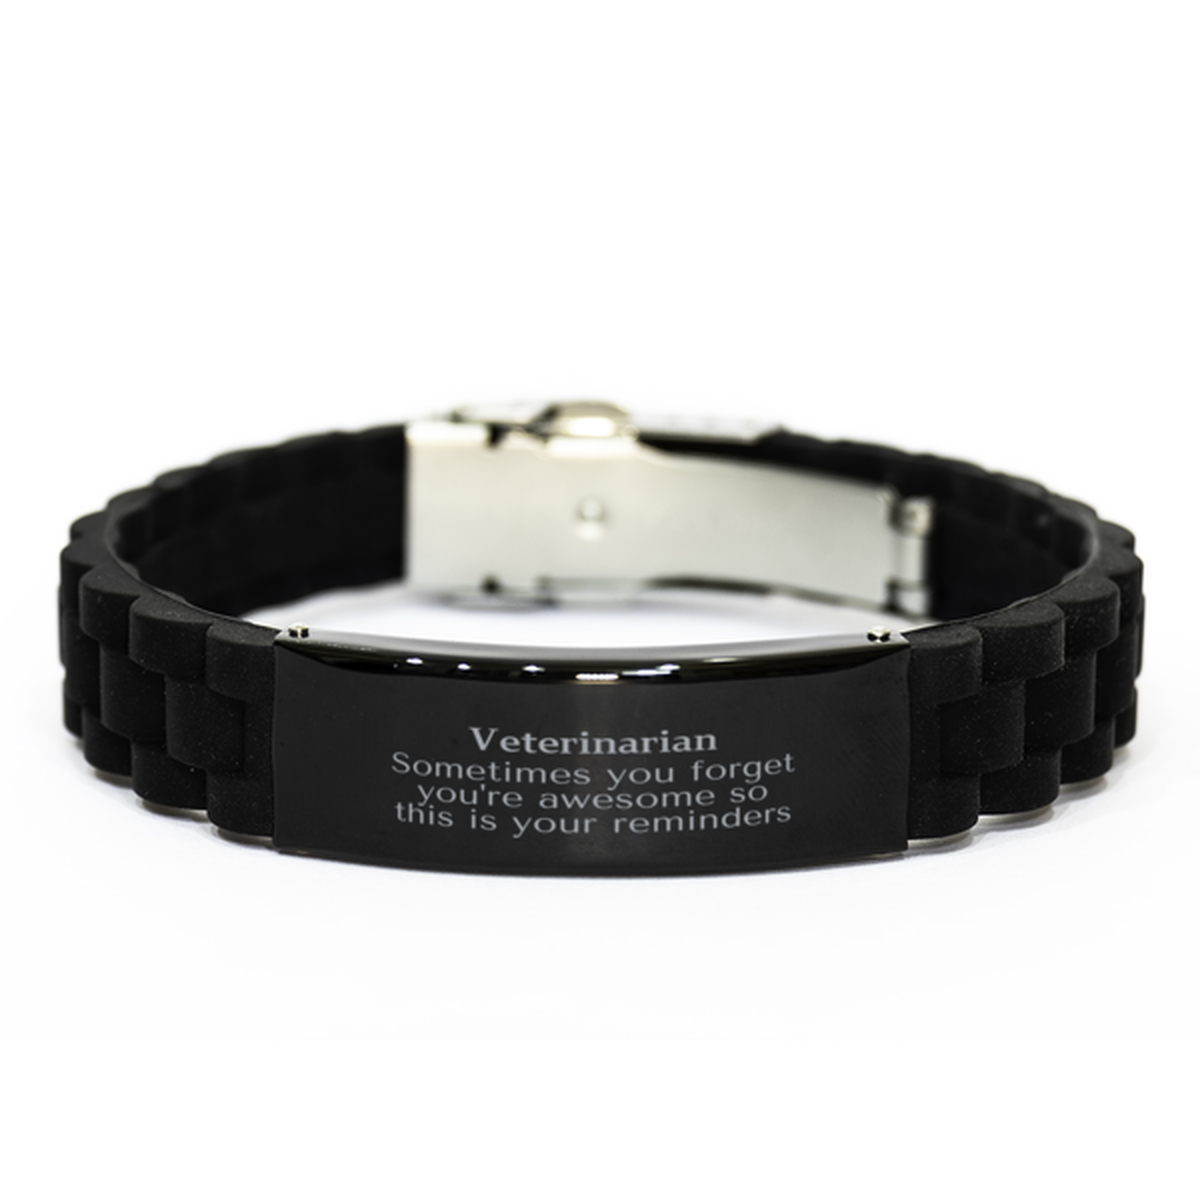 Sentimental Veterinarian Black Glidelock Clasp Bracelet, Veterinarian Sometimes you forget you're awesome so this is your reminders, Graduation Christmas Birthday Gifts for Veterinarian, Men, Women, Coworkers